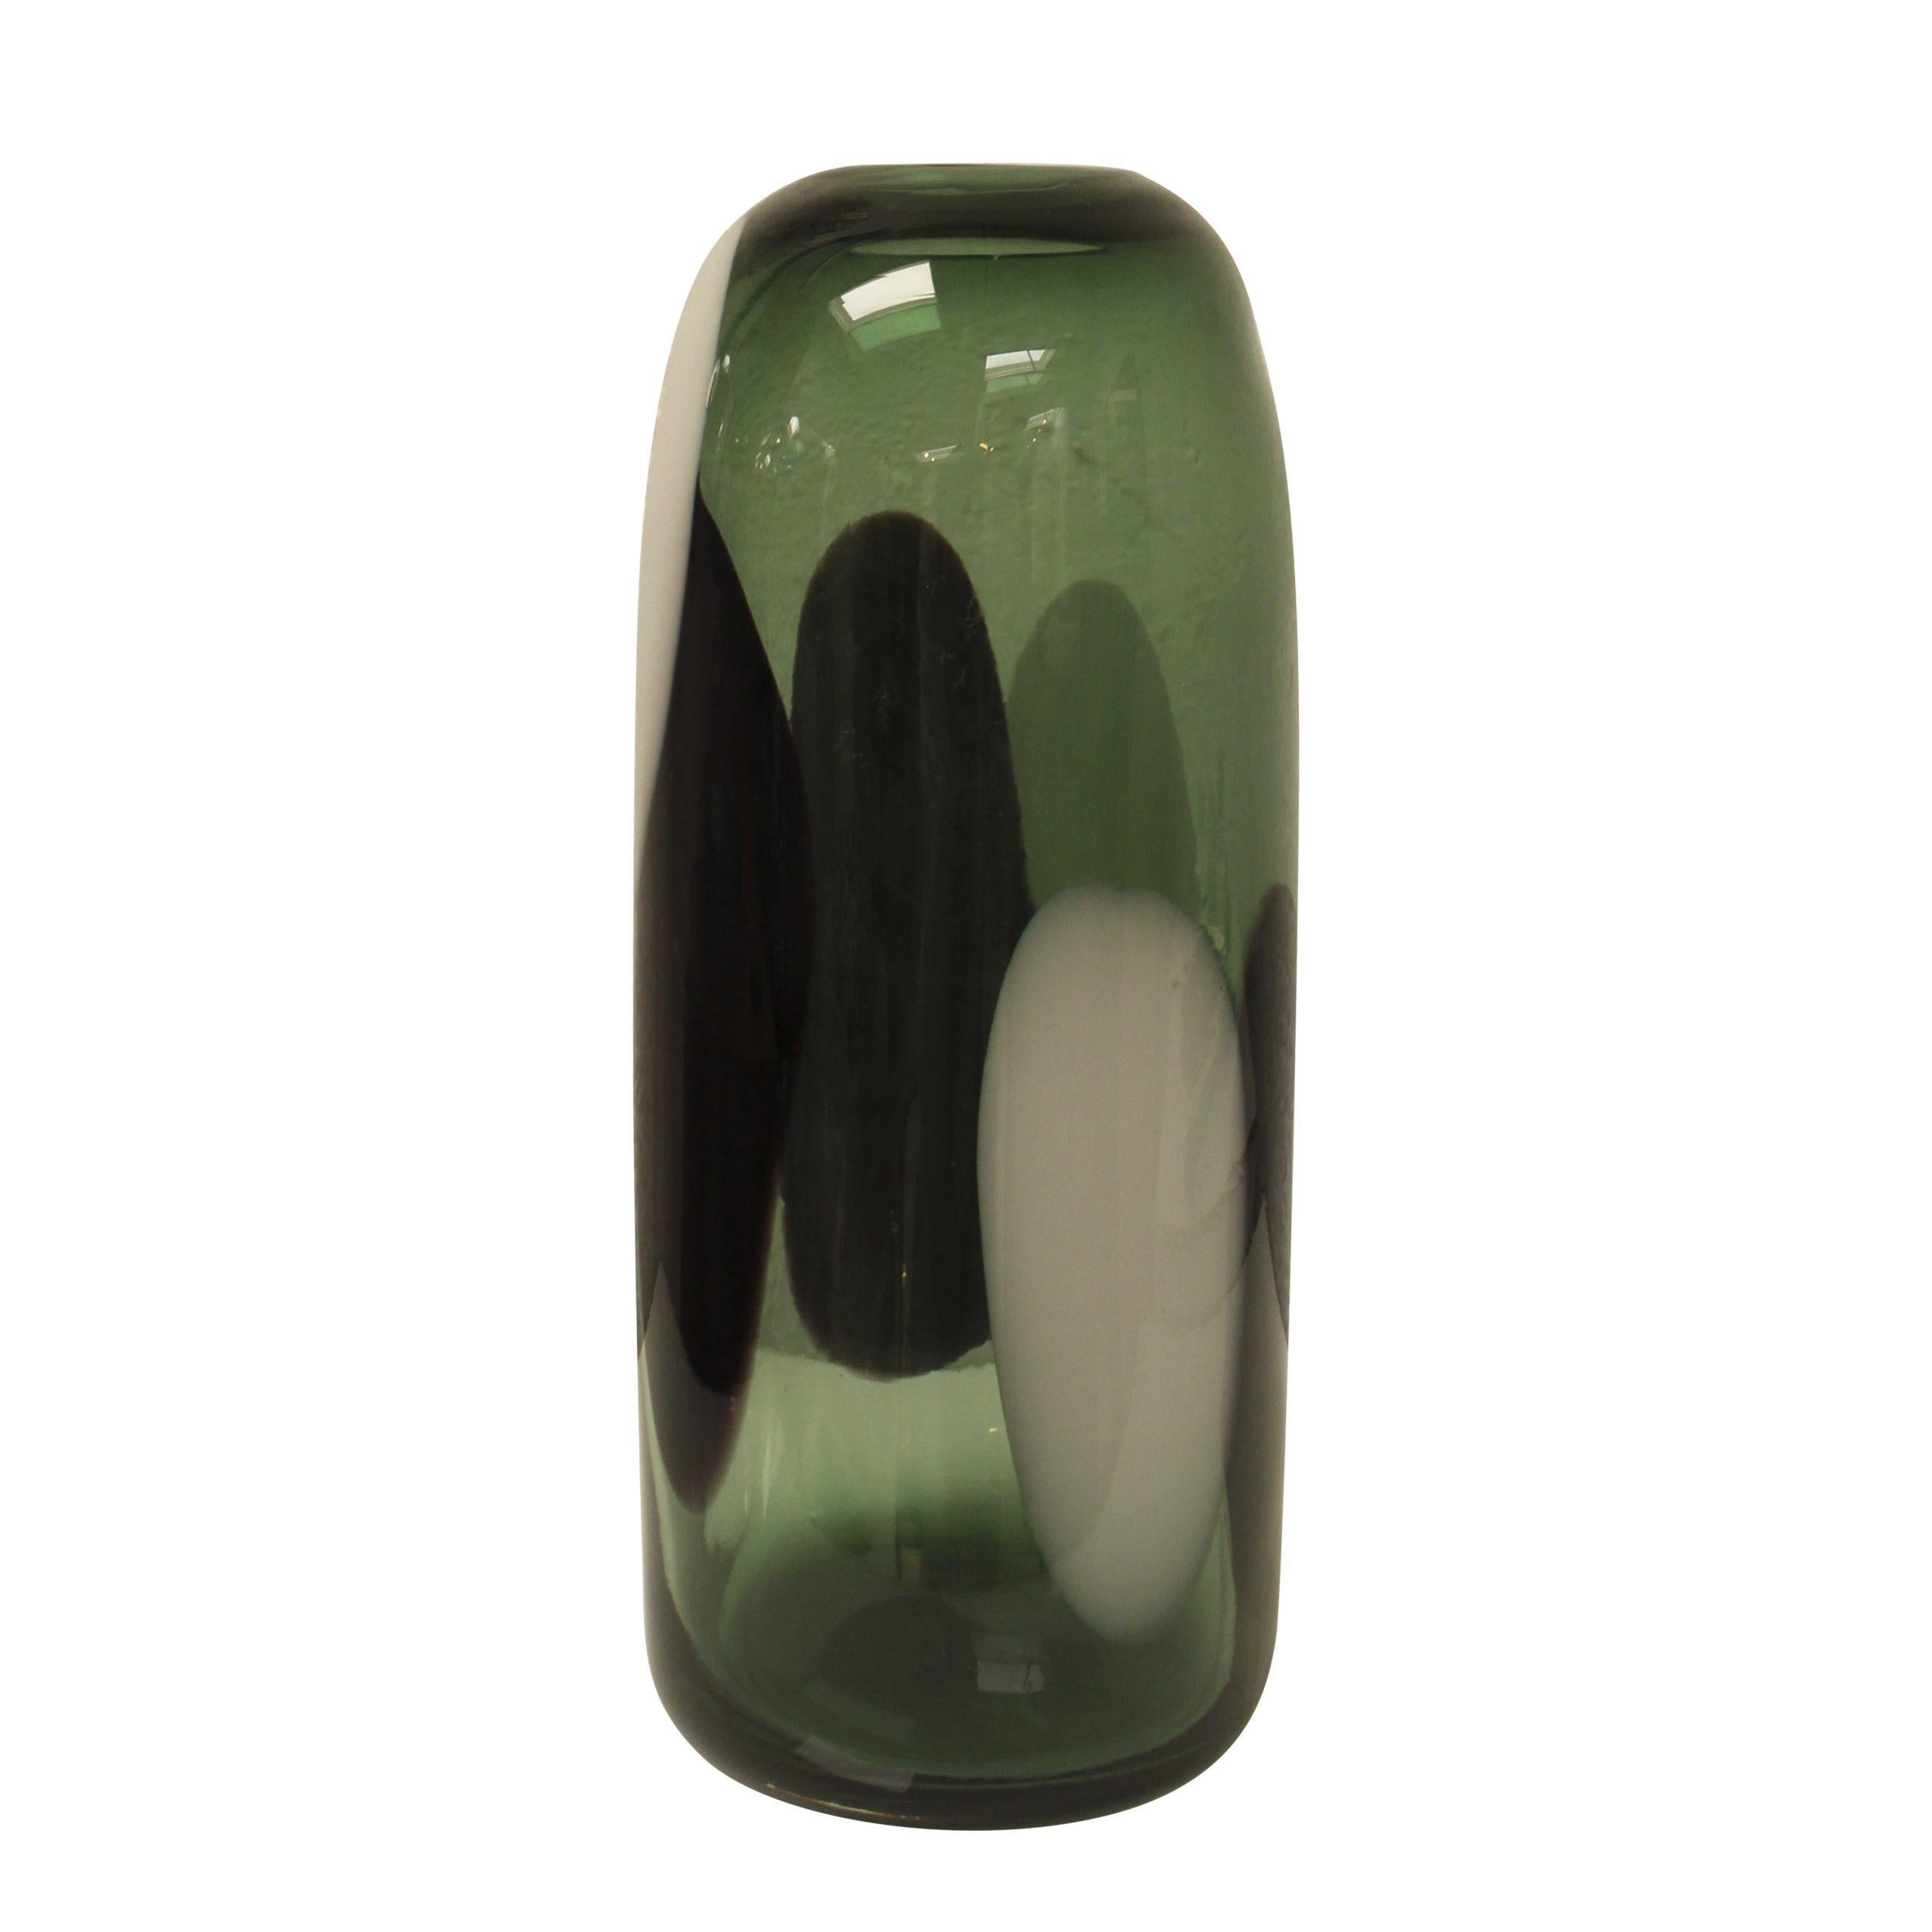 Hand-blown Italian semi-transparent glass vase, with a rounded shape in green, black and white. 